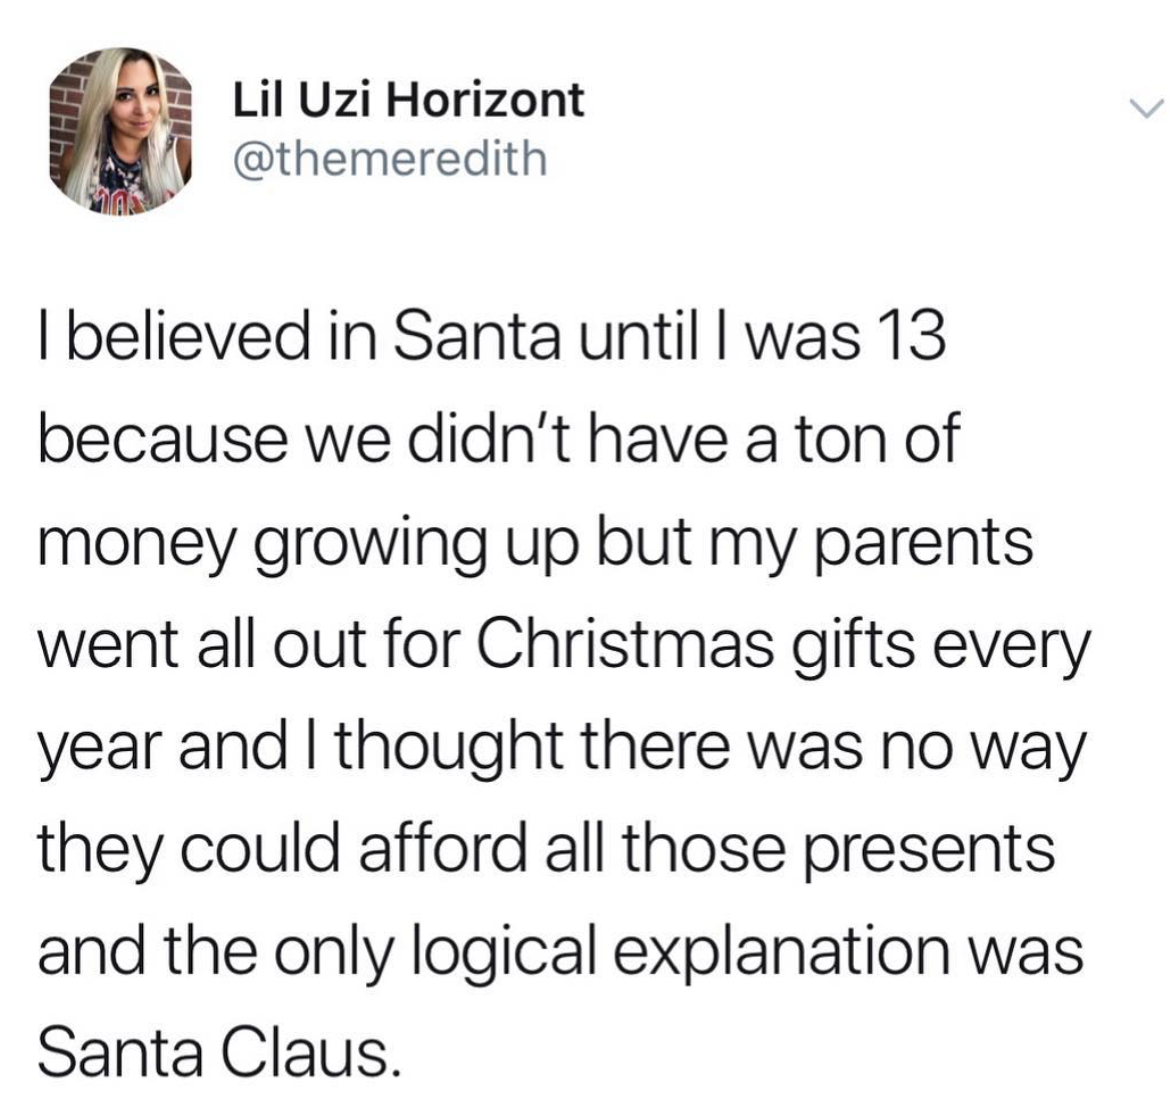 Lil Uzi Horizont I believed in Santa until I was 13 because we didn't have a ton of money growing up but my parents went all out for Christmas gifts every year and I thought there was no way they could afford all those presents and the only logical…